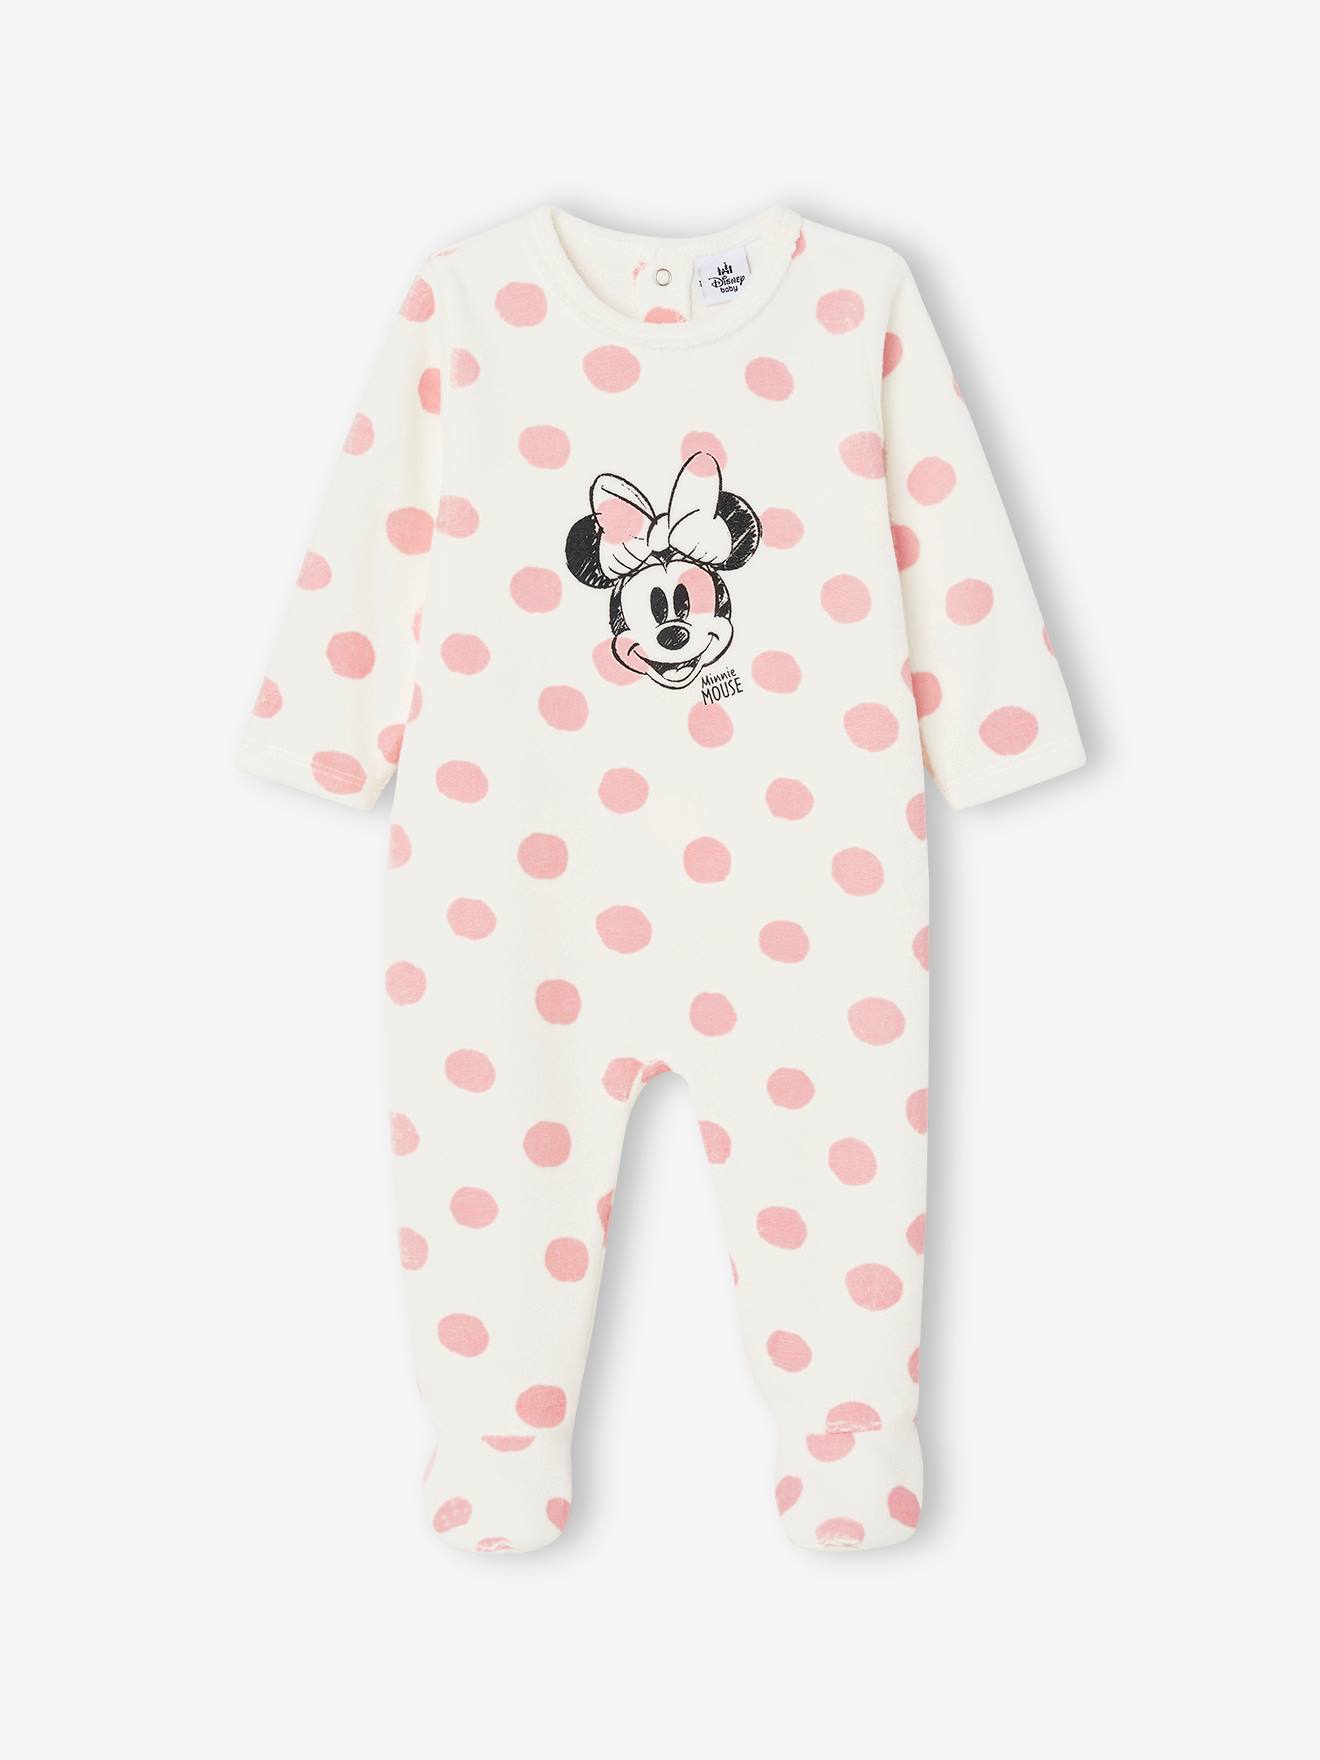 Minnie Mouse Velour Sleepsuit for Baby Girls by Disney(r) ecru